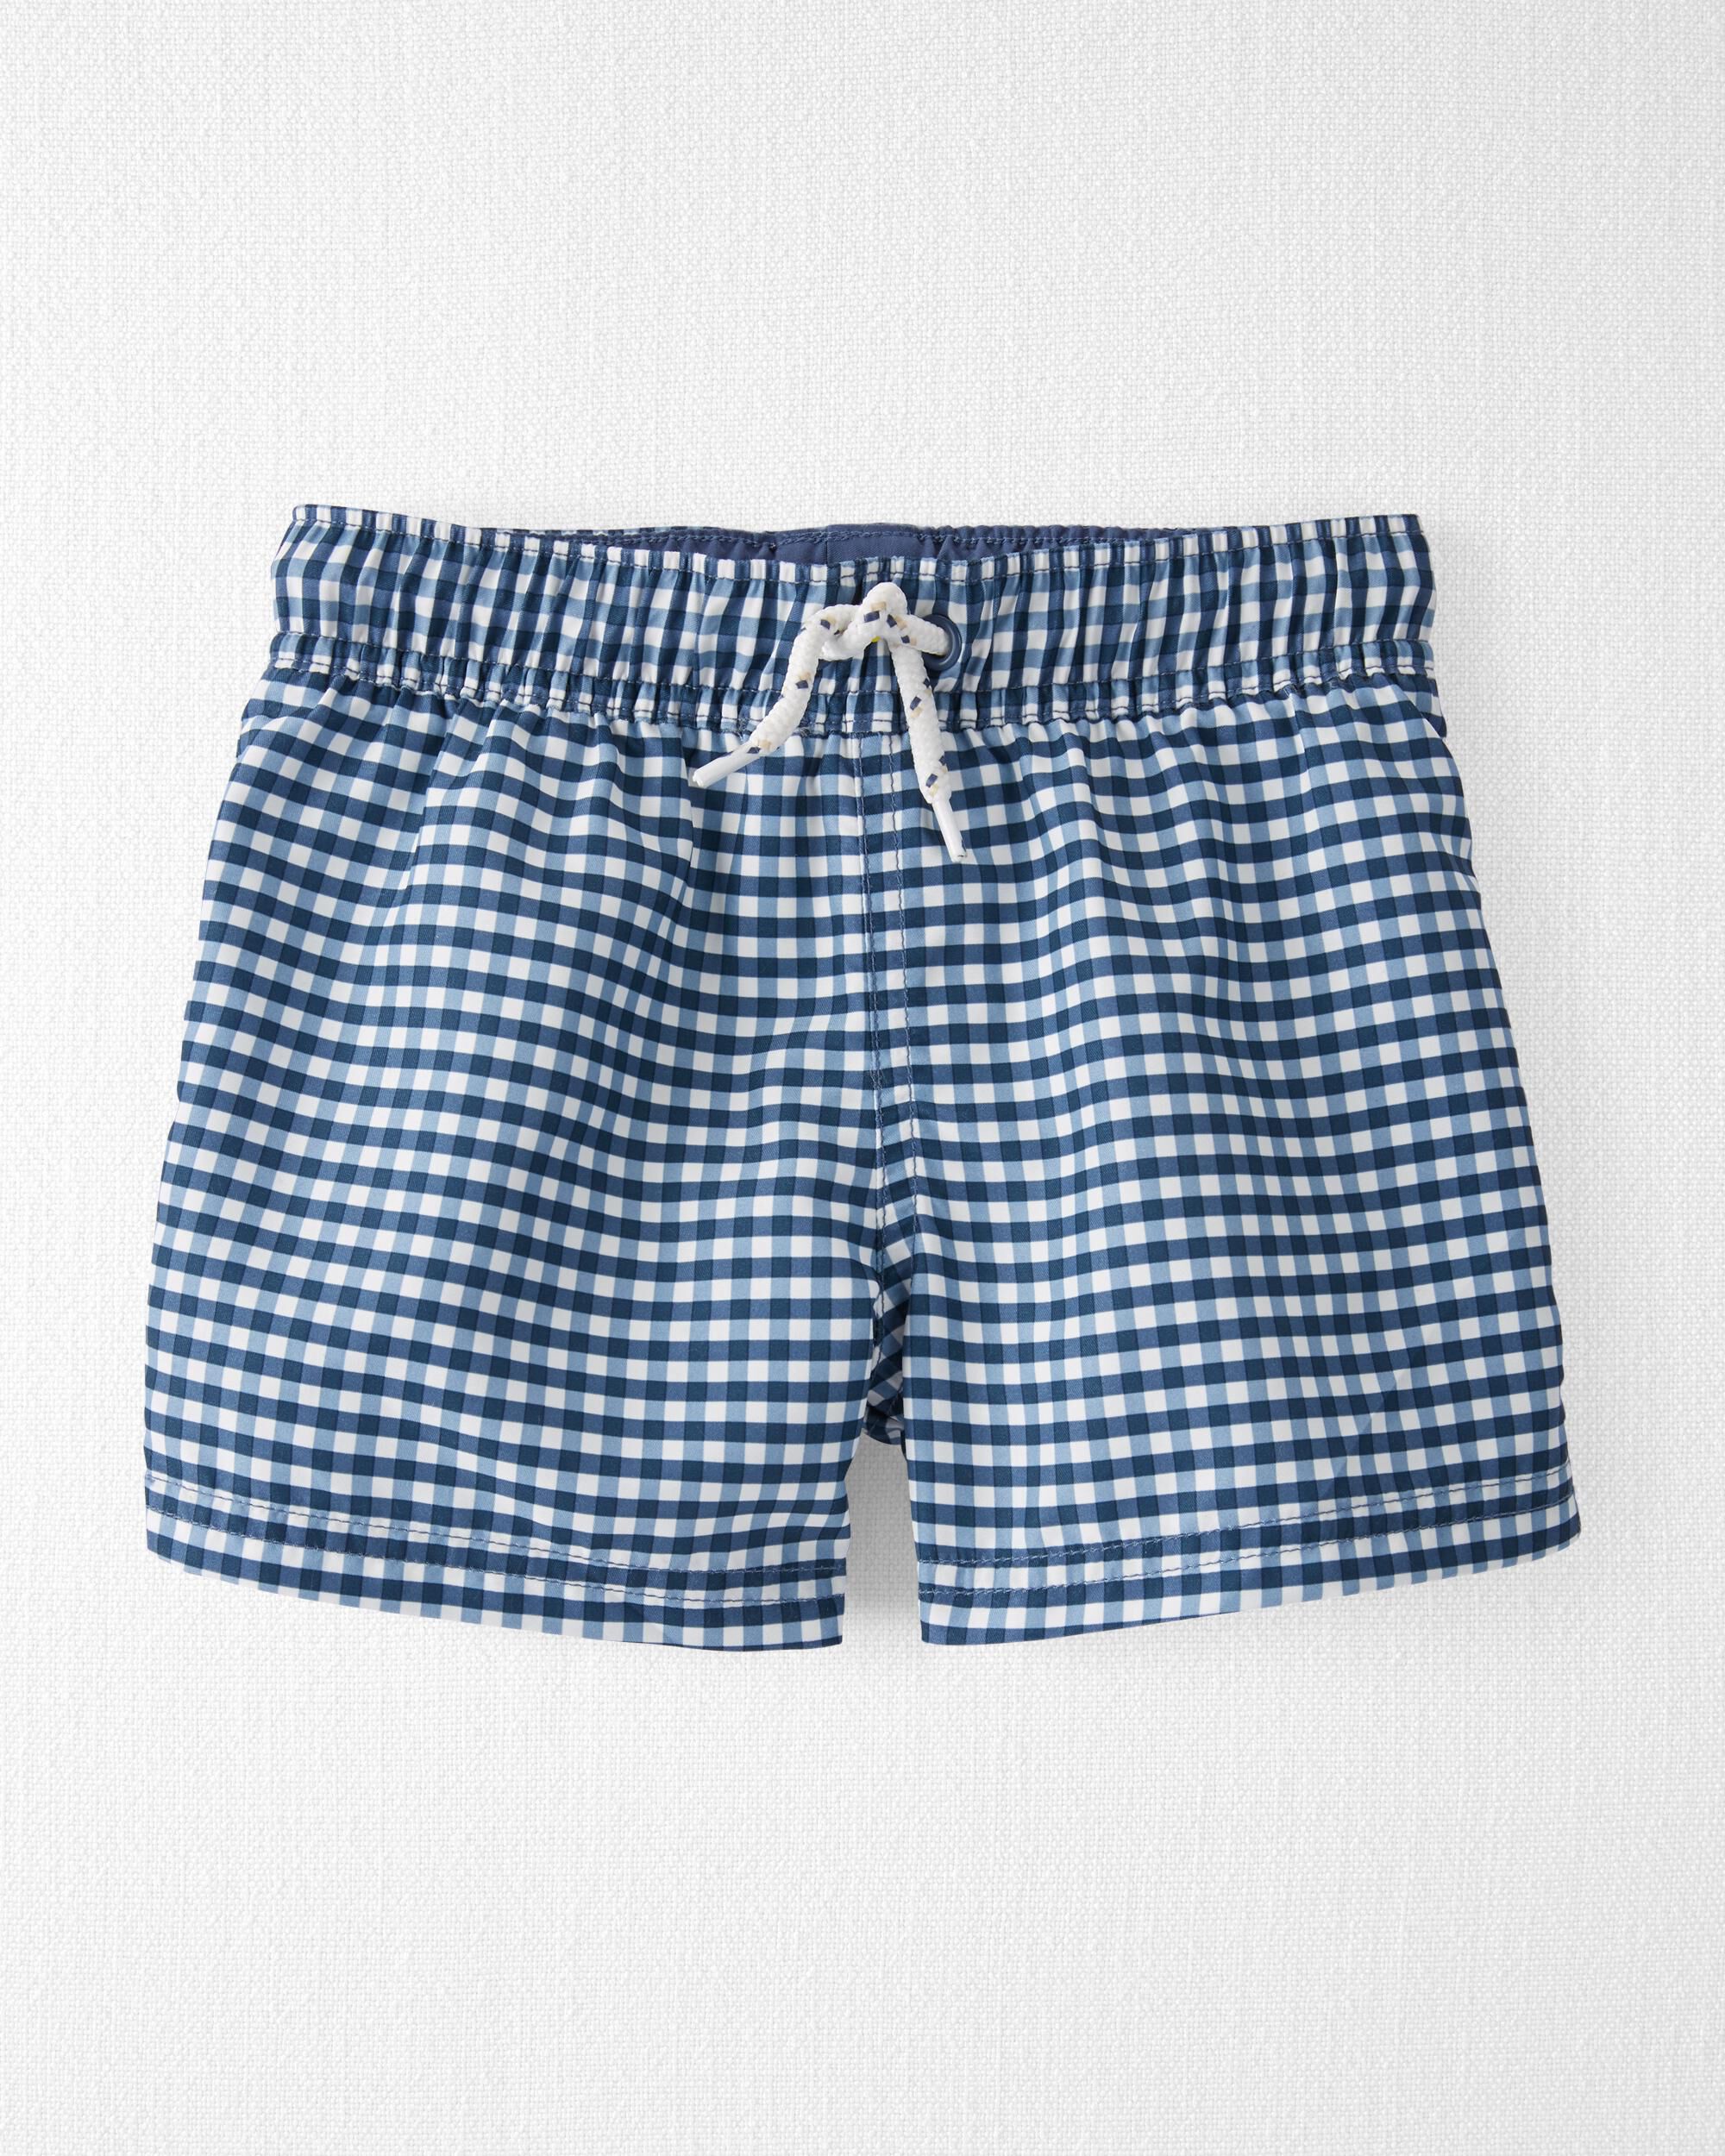 Details about   New Baby Kids Boys 12M 18M 24M UV Protection Inner Brief Swim Shorts Trunks 